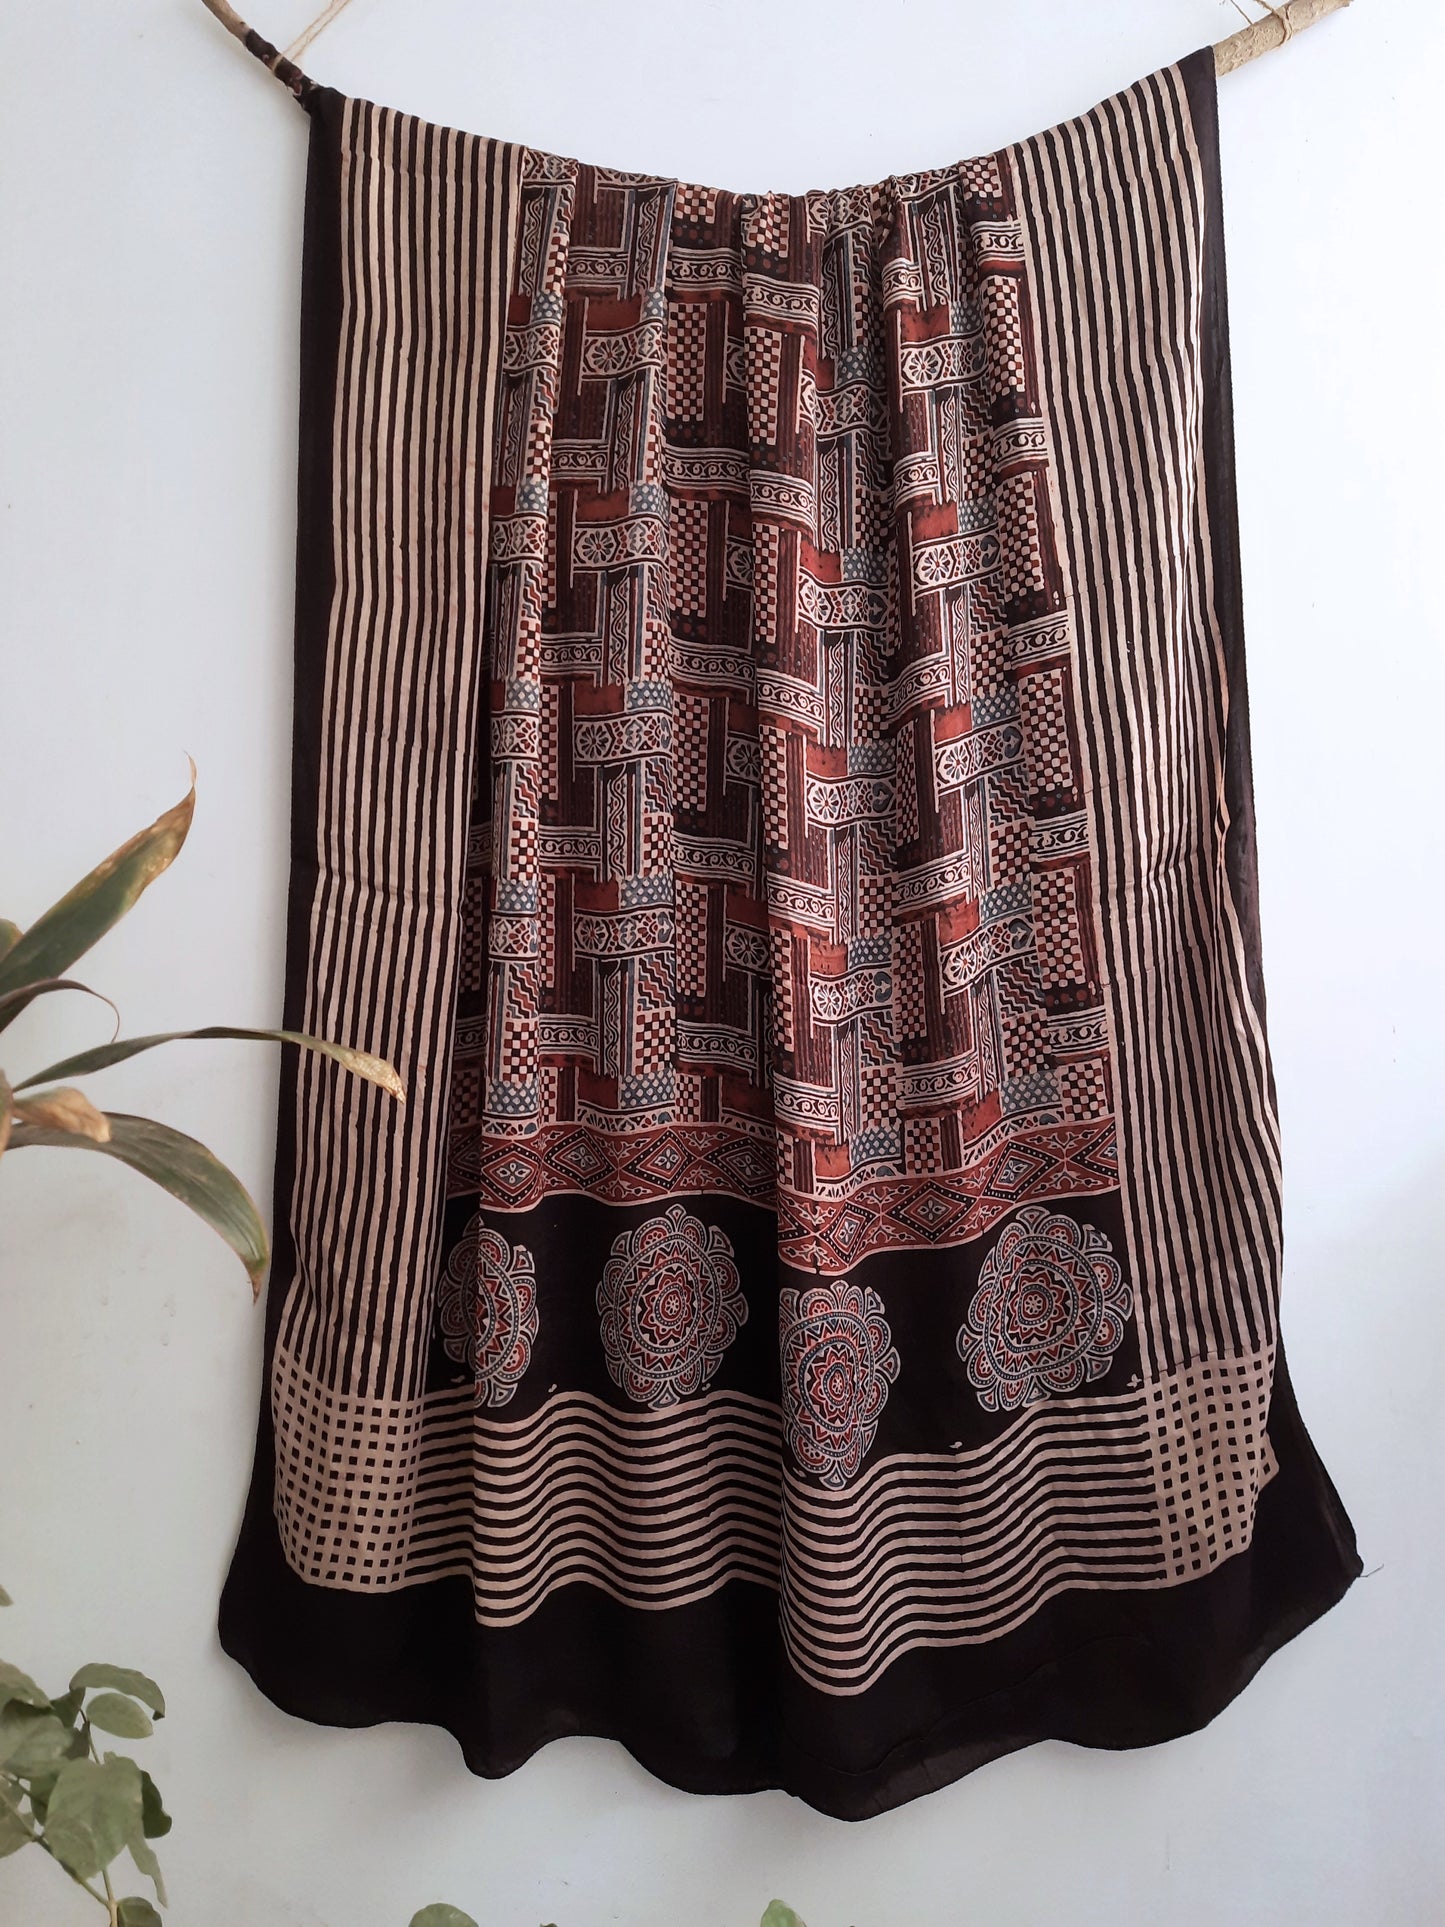 Luxurious Black Ajrakh Modal Silk Dupatta - Handcrafted with indulgently soft modal silk, featuring Ajrakh hand block printing and natural dyeing. A captivating addition to your wardrobe, offering timeless style and ethical craftsmanship.